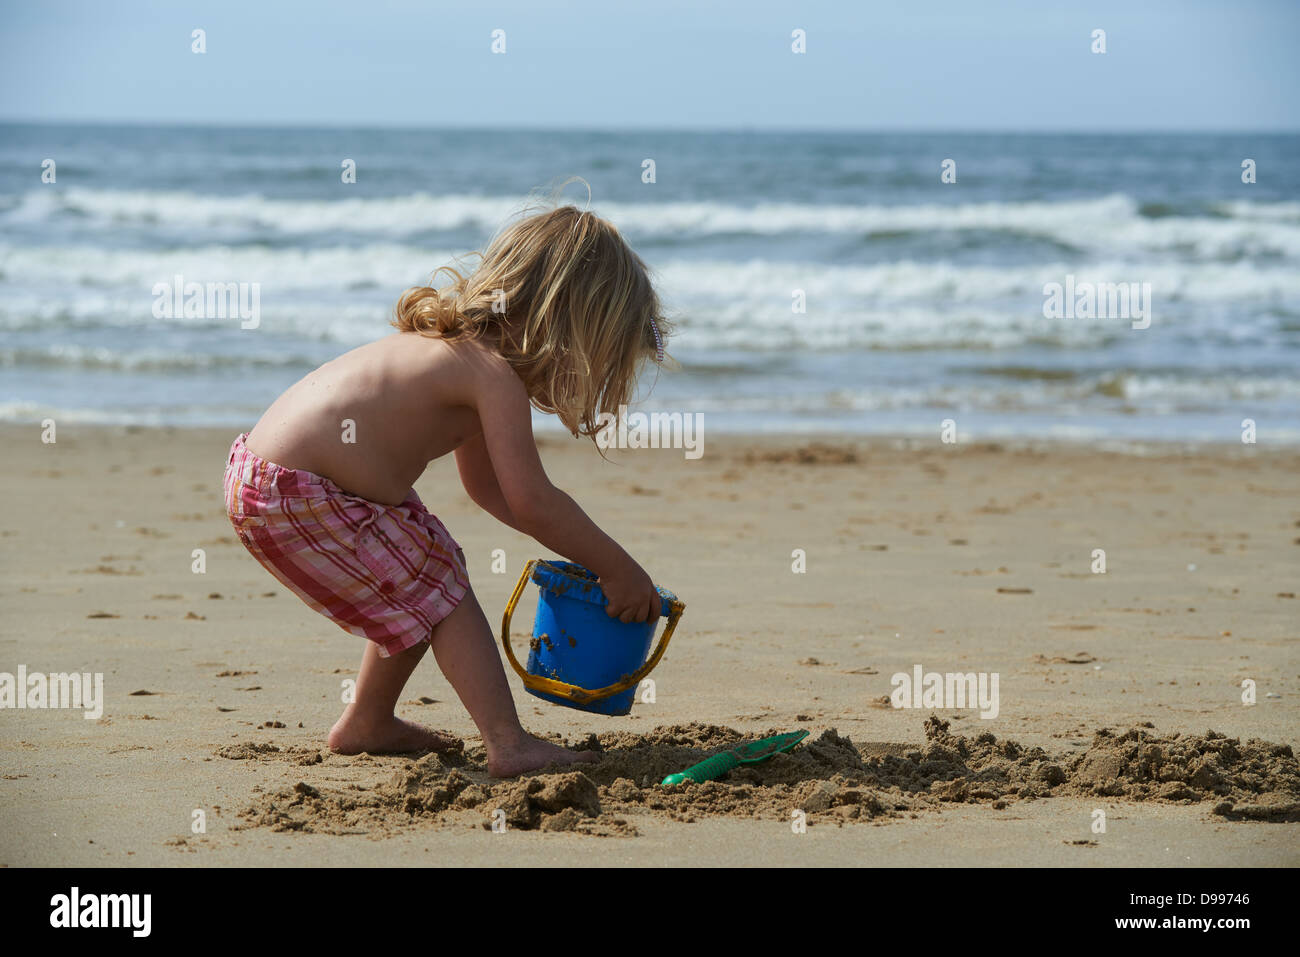 Toddler child blond girl playing in sand on beach Stock Photo